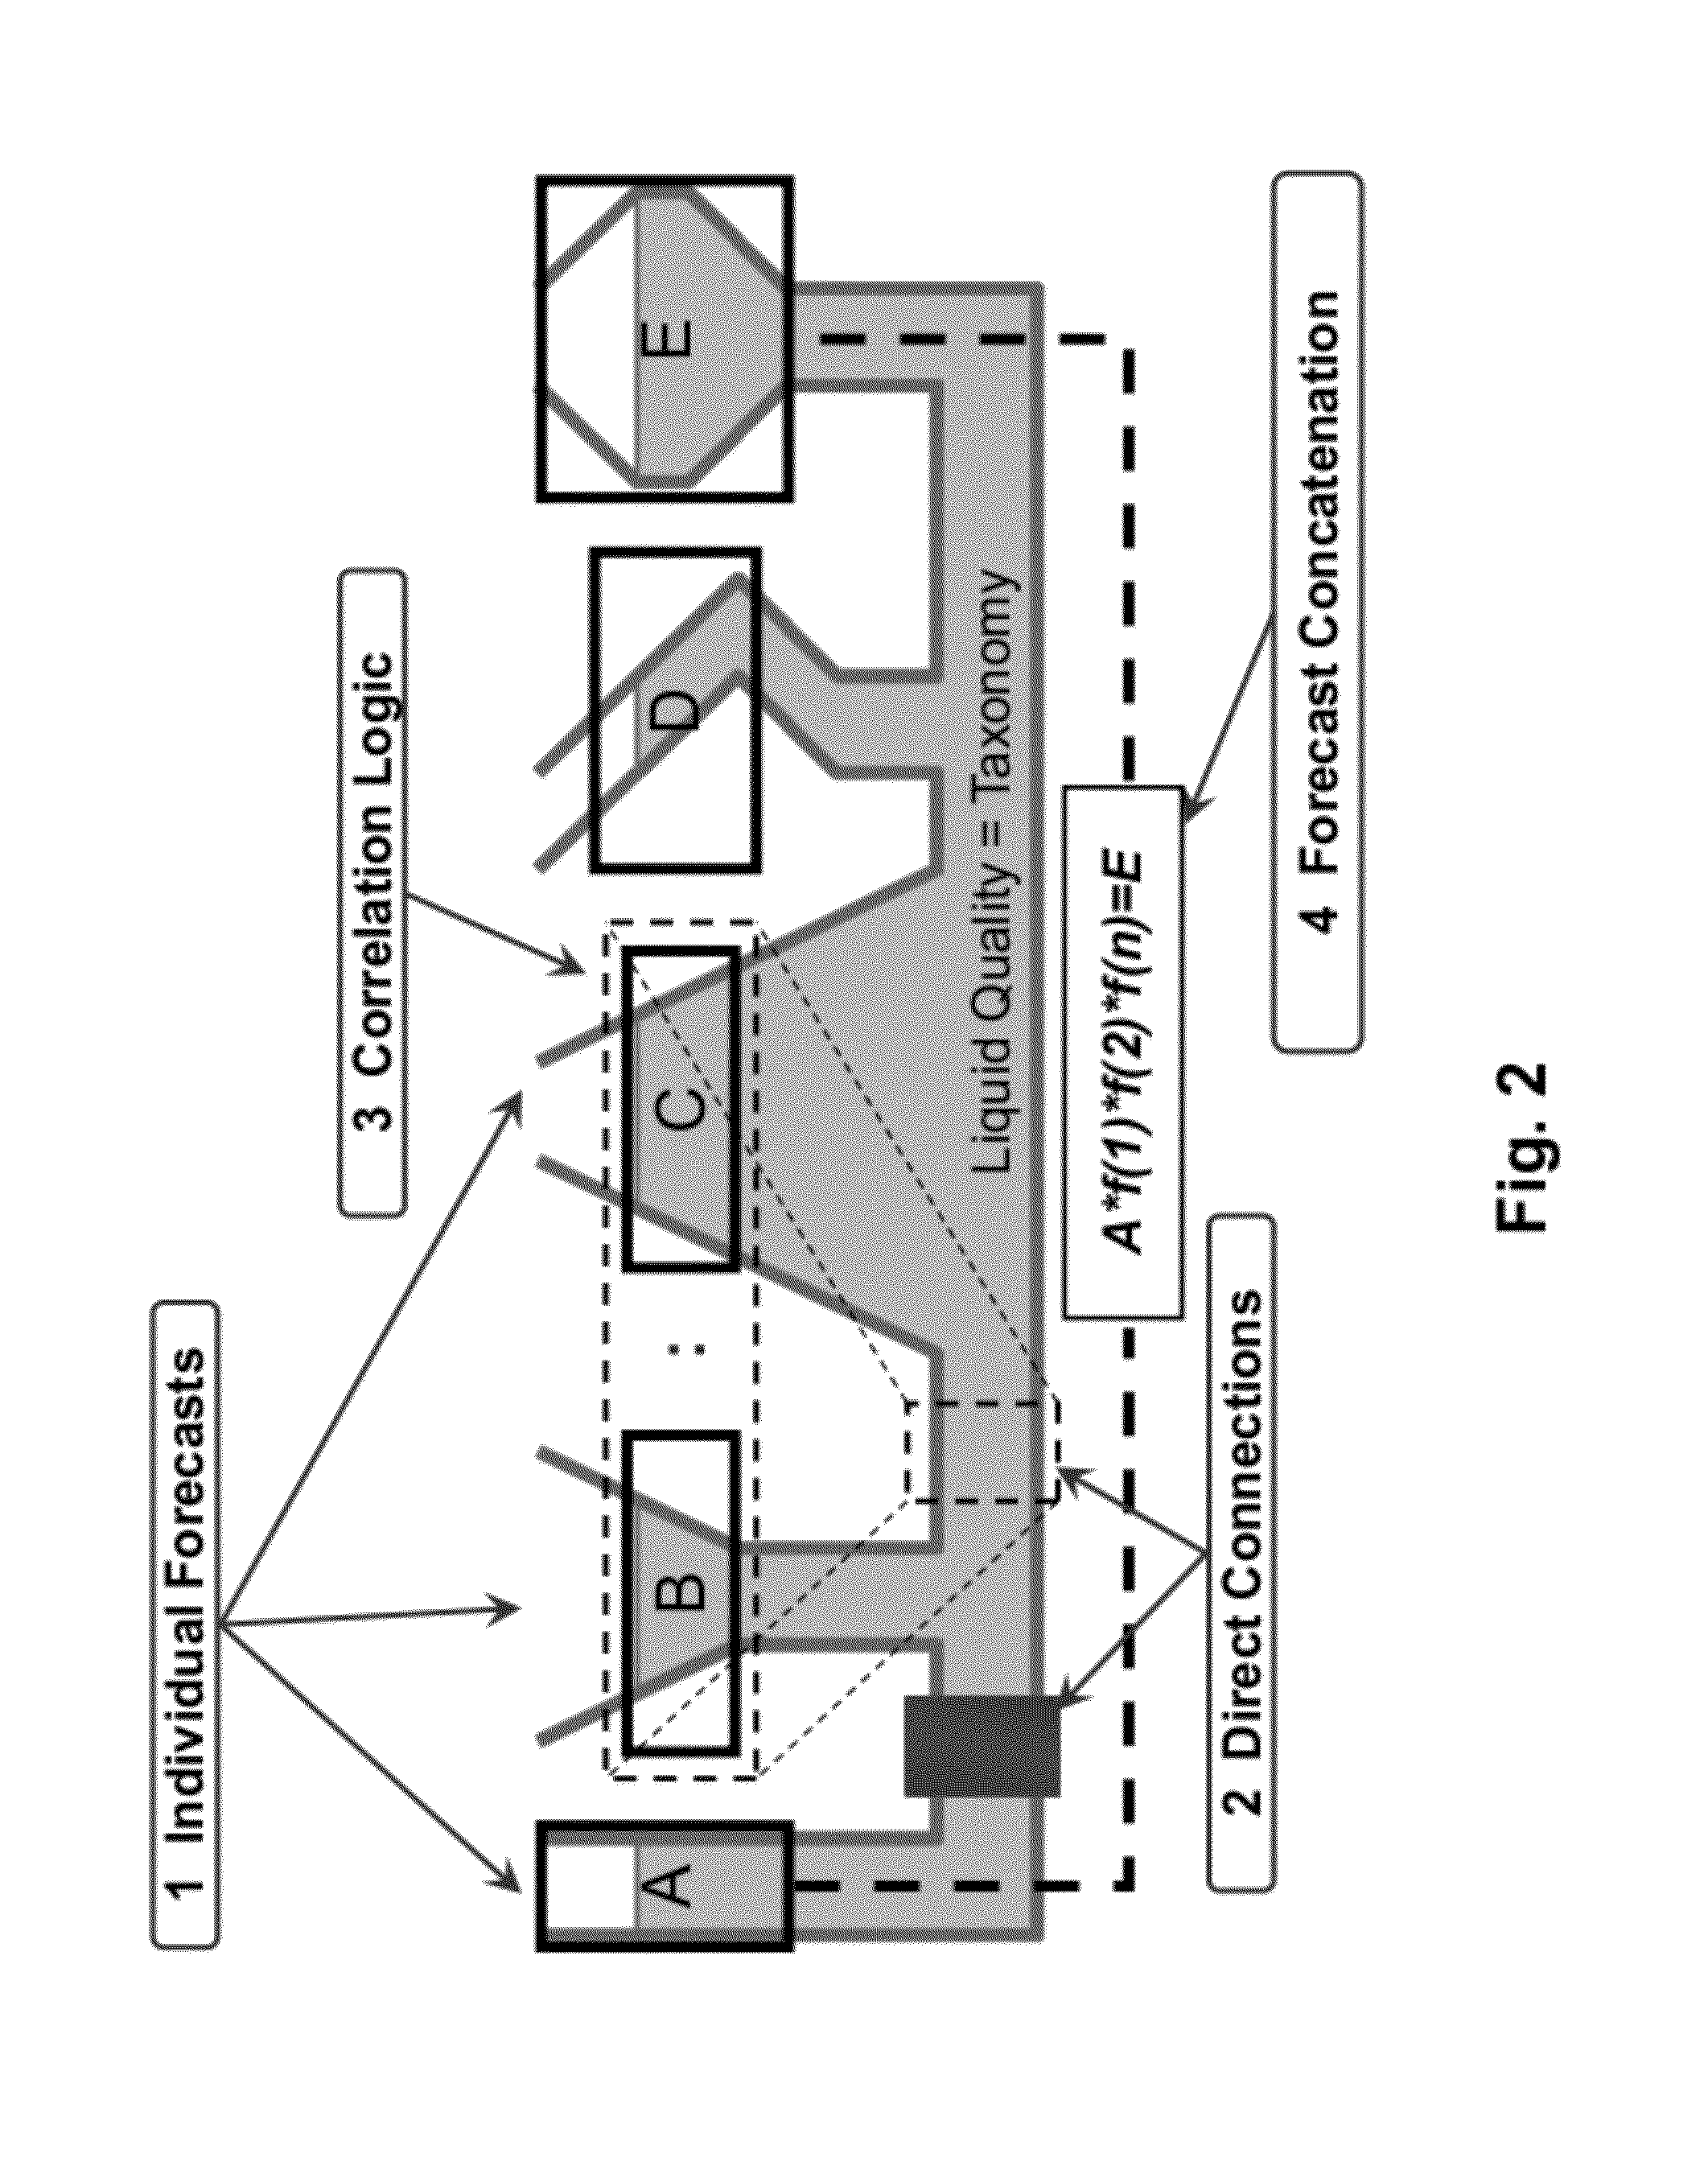 Method and system for generating a prediction network